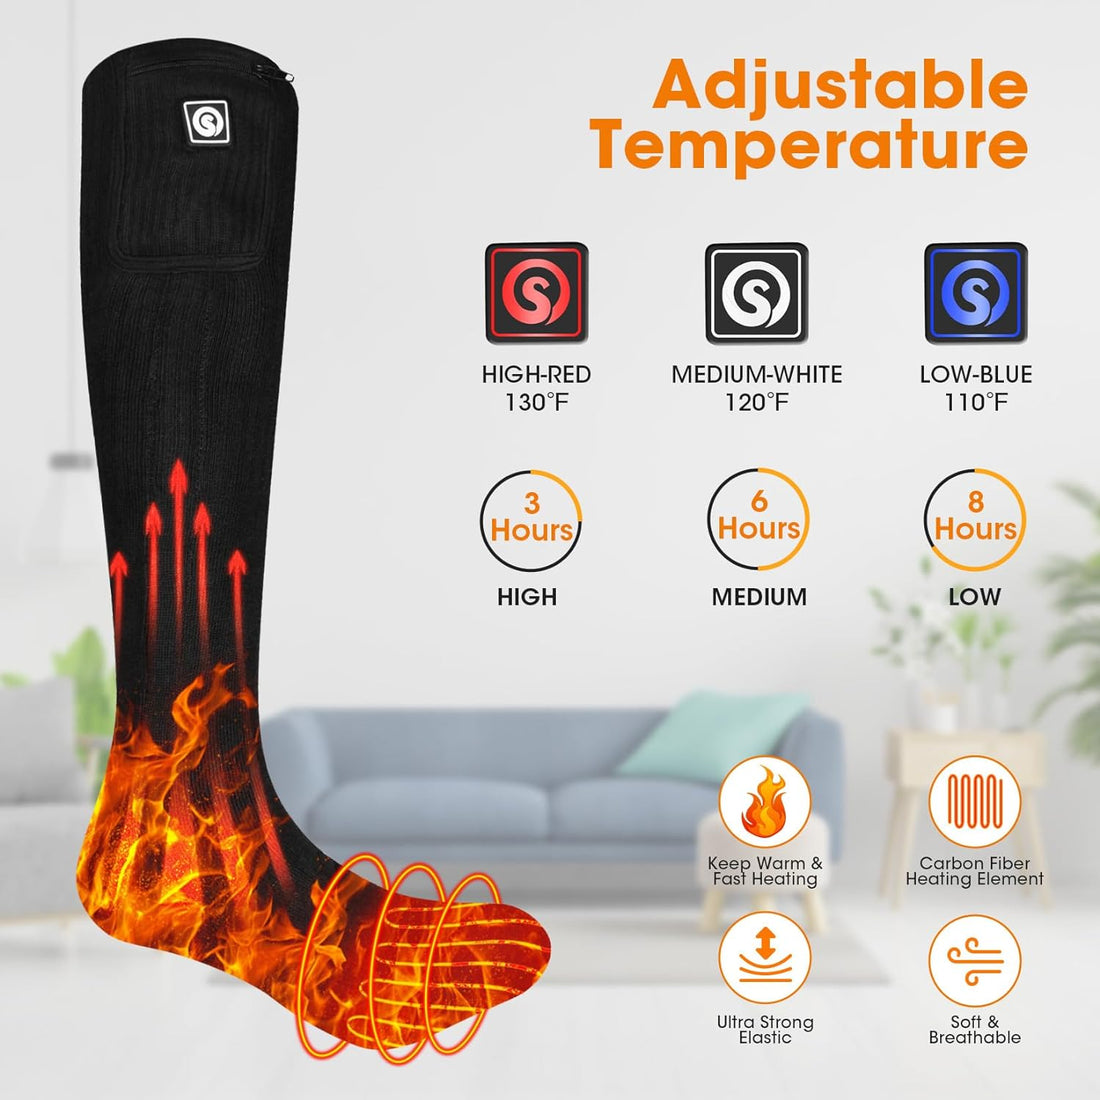 Heated Socks, Rechargeable Electric Socks for Men Women, 7.7V Battery Power Thermal Heating Socks Winter Foot Warmers for Hunting Hiking Camping Fishing Zipper Battery Pocket